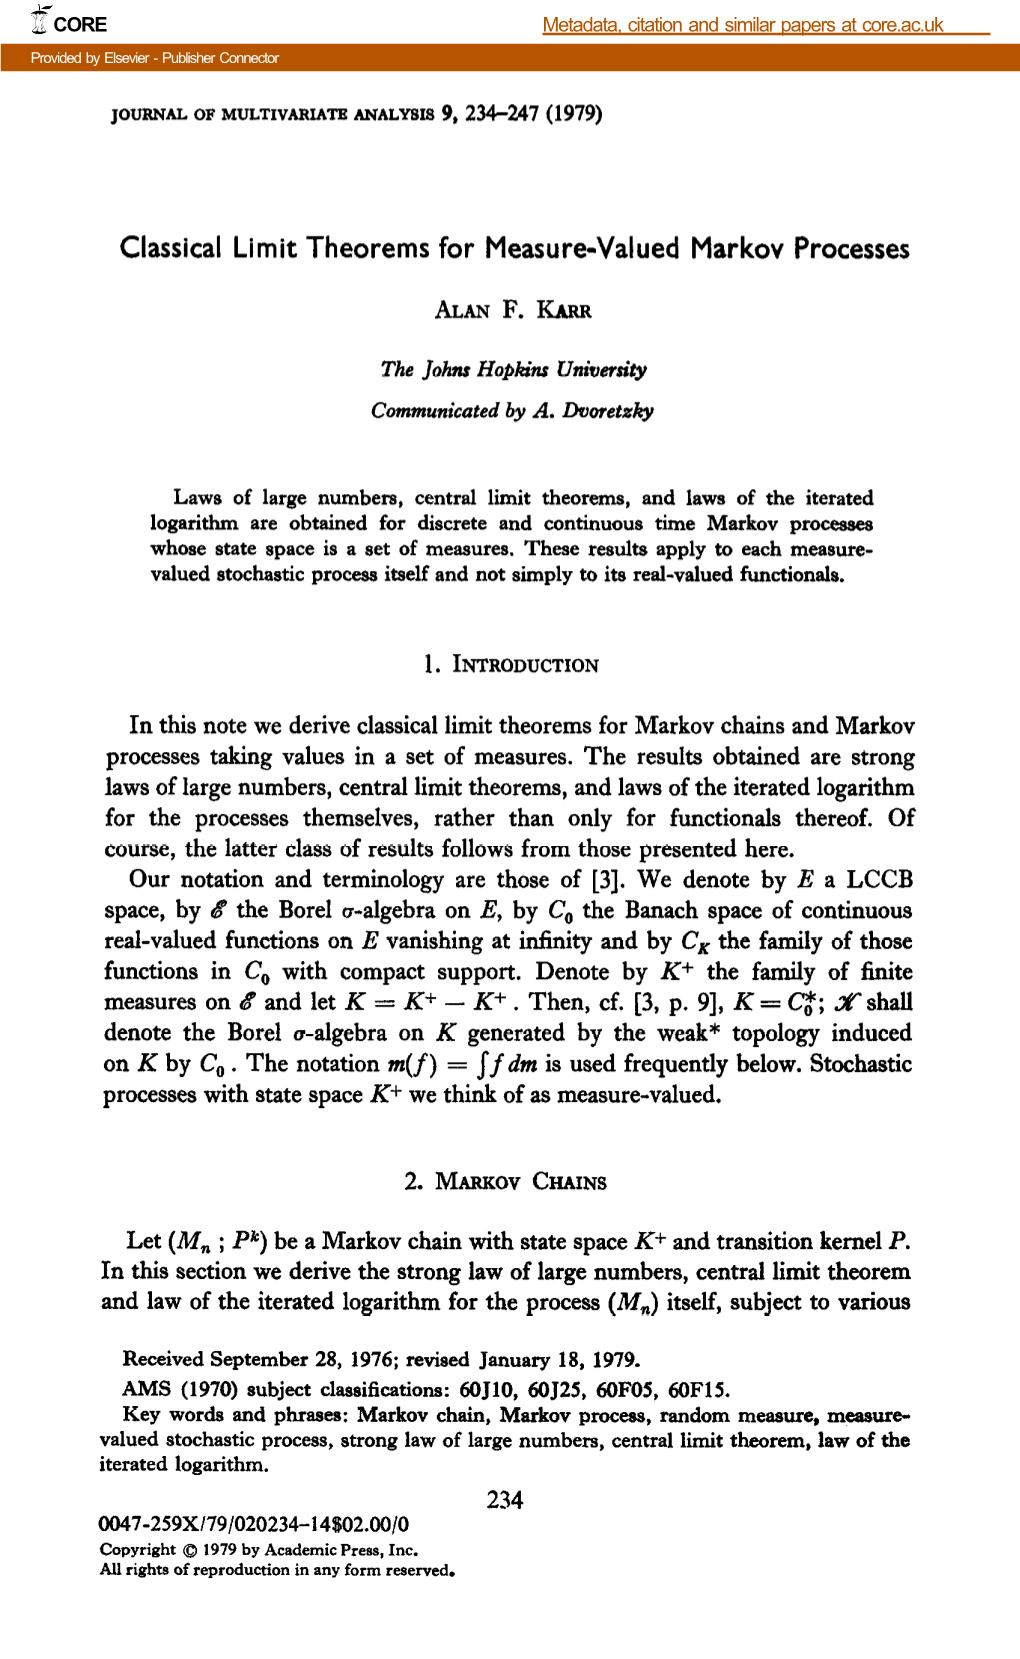 Classical Limit Theorems for Measure-Valued Markov Processes